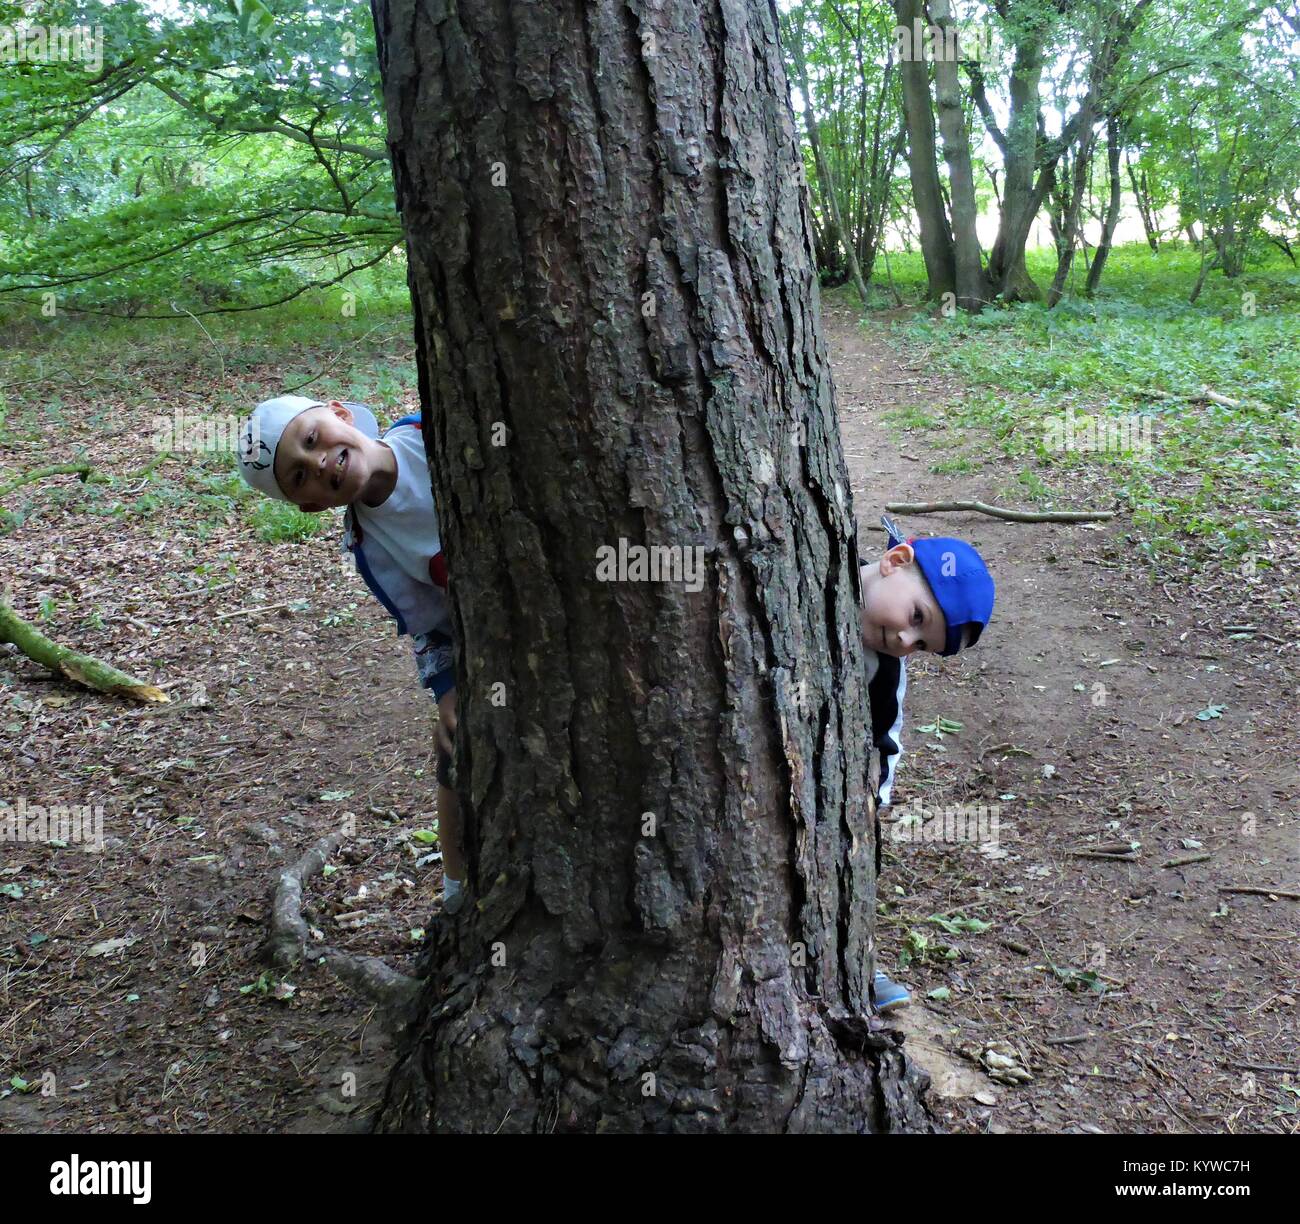 Two boys wearing baseball caps peeping out from around a big tree Stock Photo